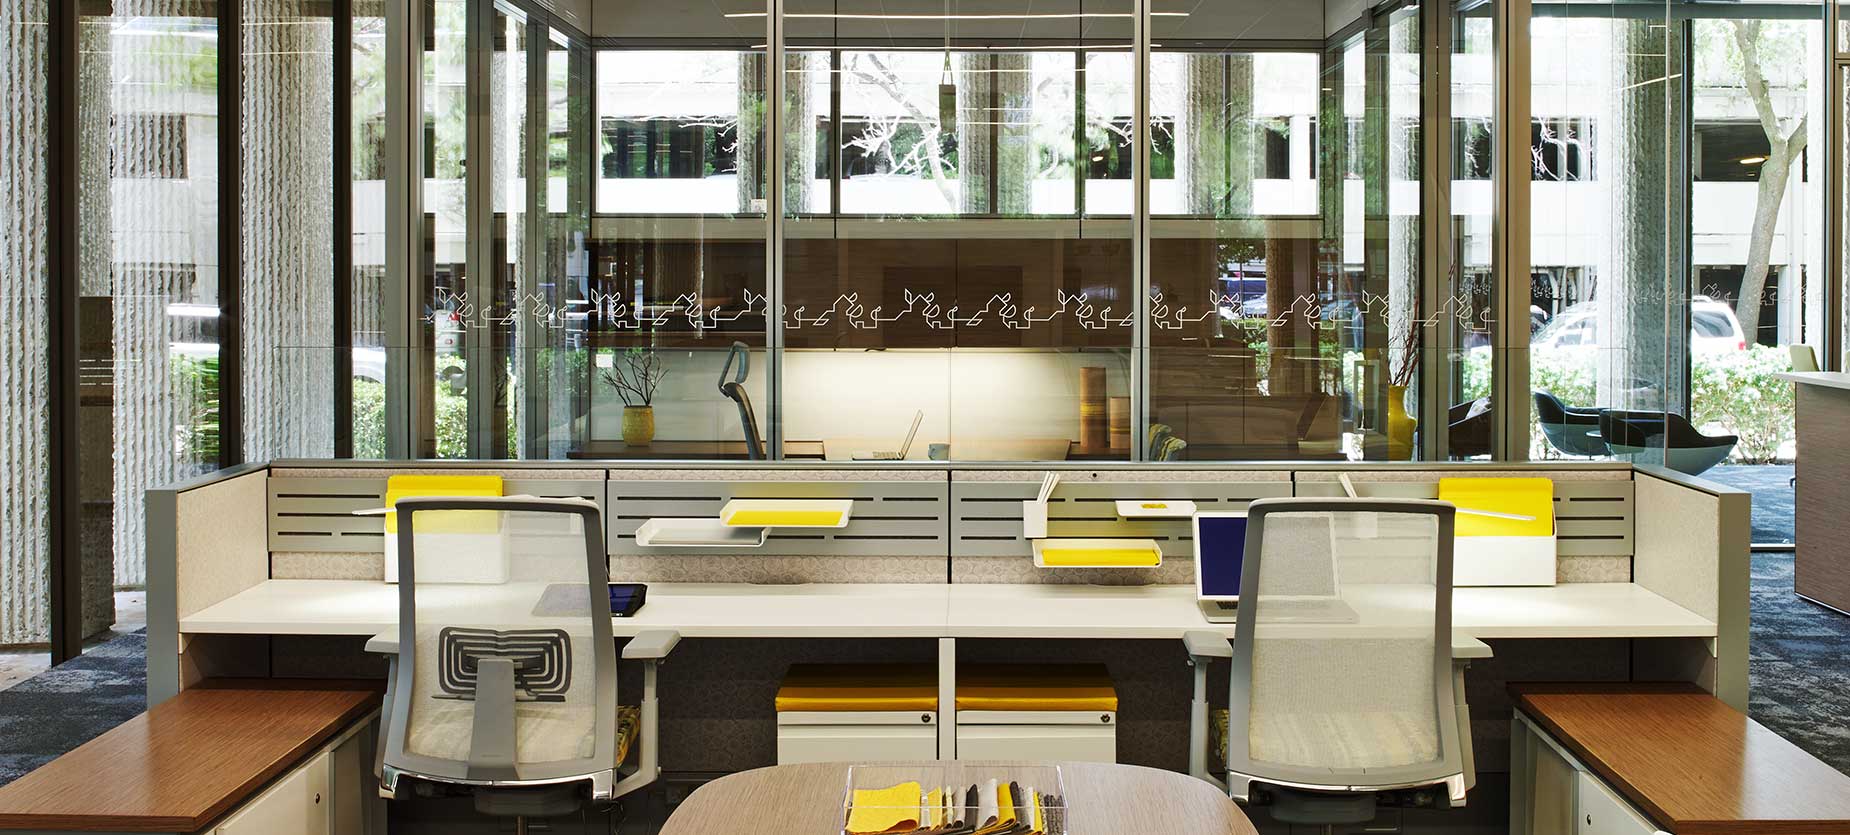 These workstation applications demonstrate how a traditional workspace can be designed to leverage views and collaboration. Low storage and panel heights allow connectivity to the greater office and views outside, while the orientation helps provide opportunities for collaboration in an application positioned for a team focused on complimentary tasks.